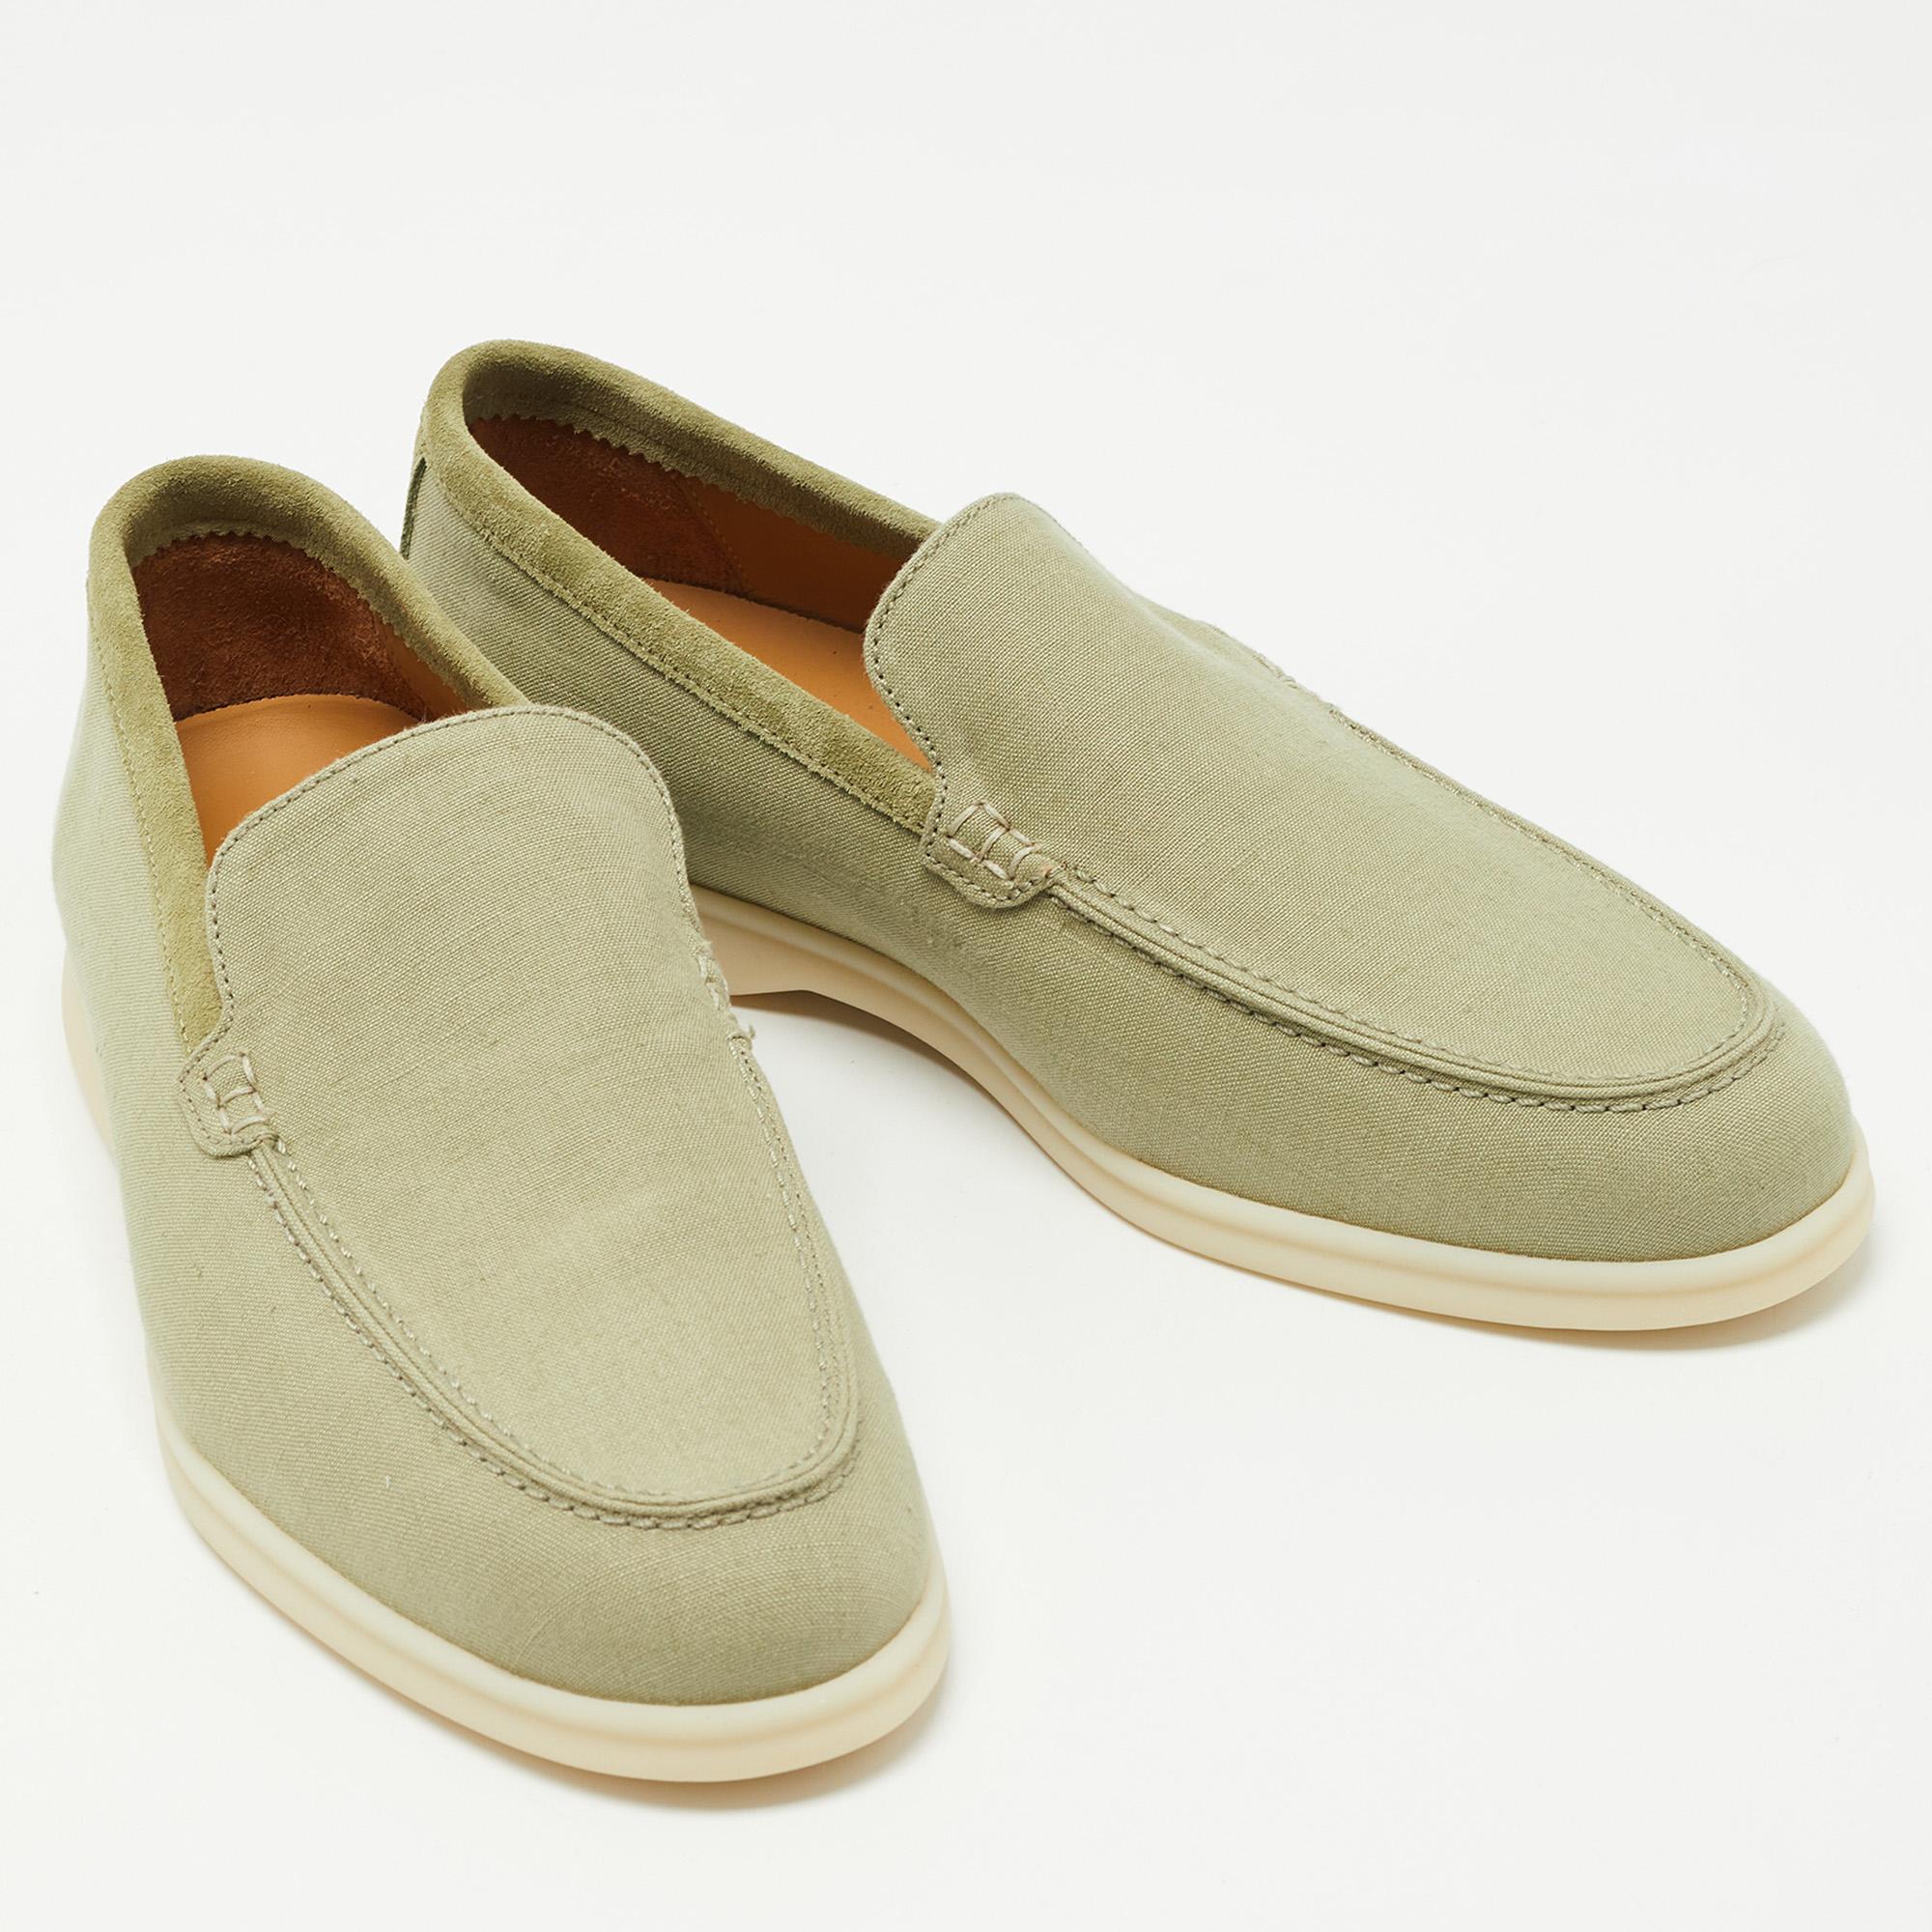 Loro Piana Green Suede and Fabric Summer Walk Loafers Size 41.5 3